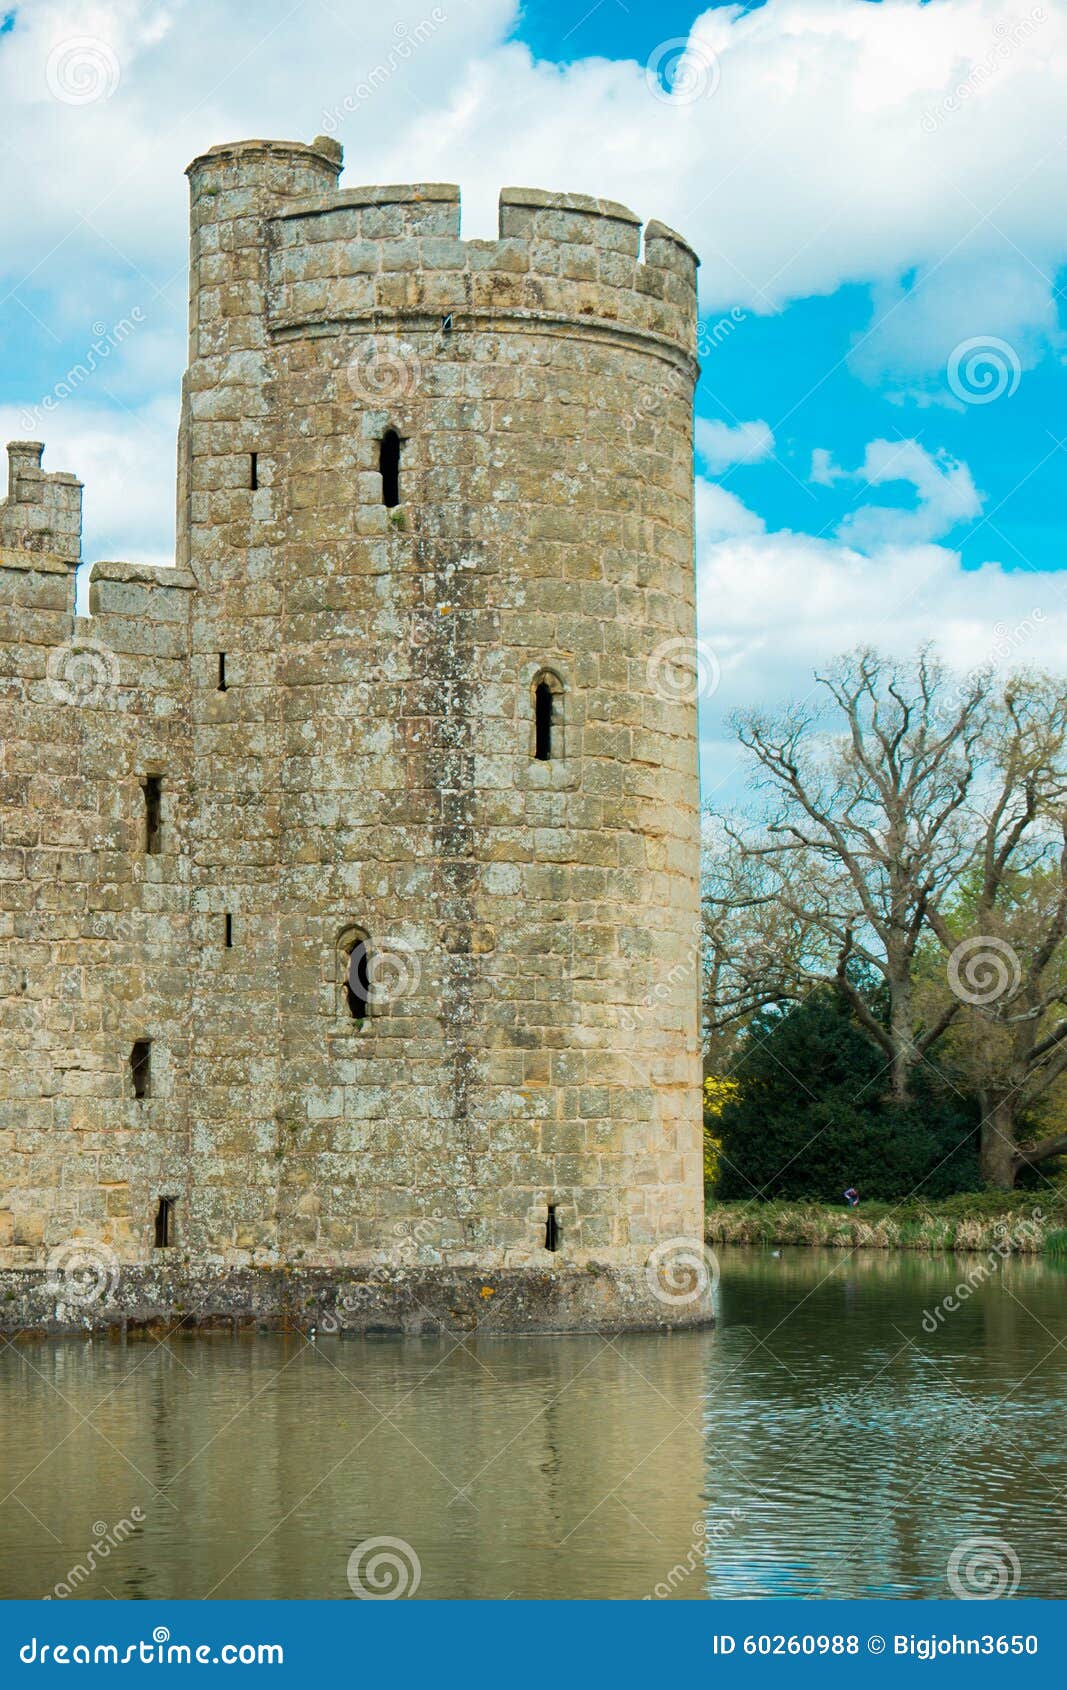 Medieval Castle Tower with Moat Stock Photo - Image of british, stone